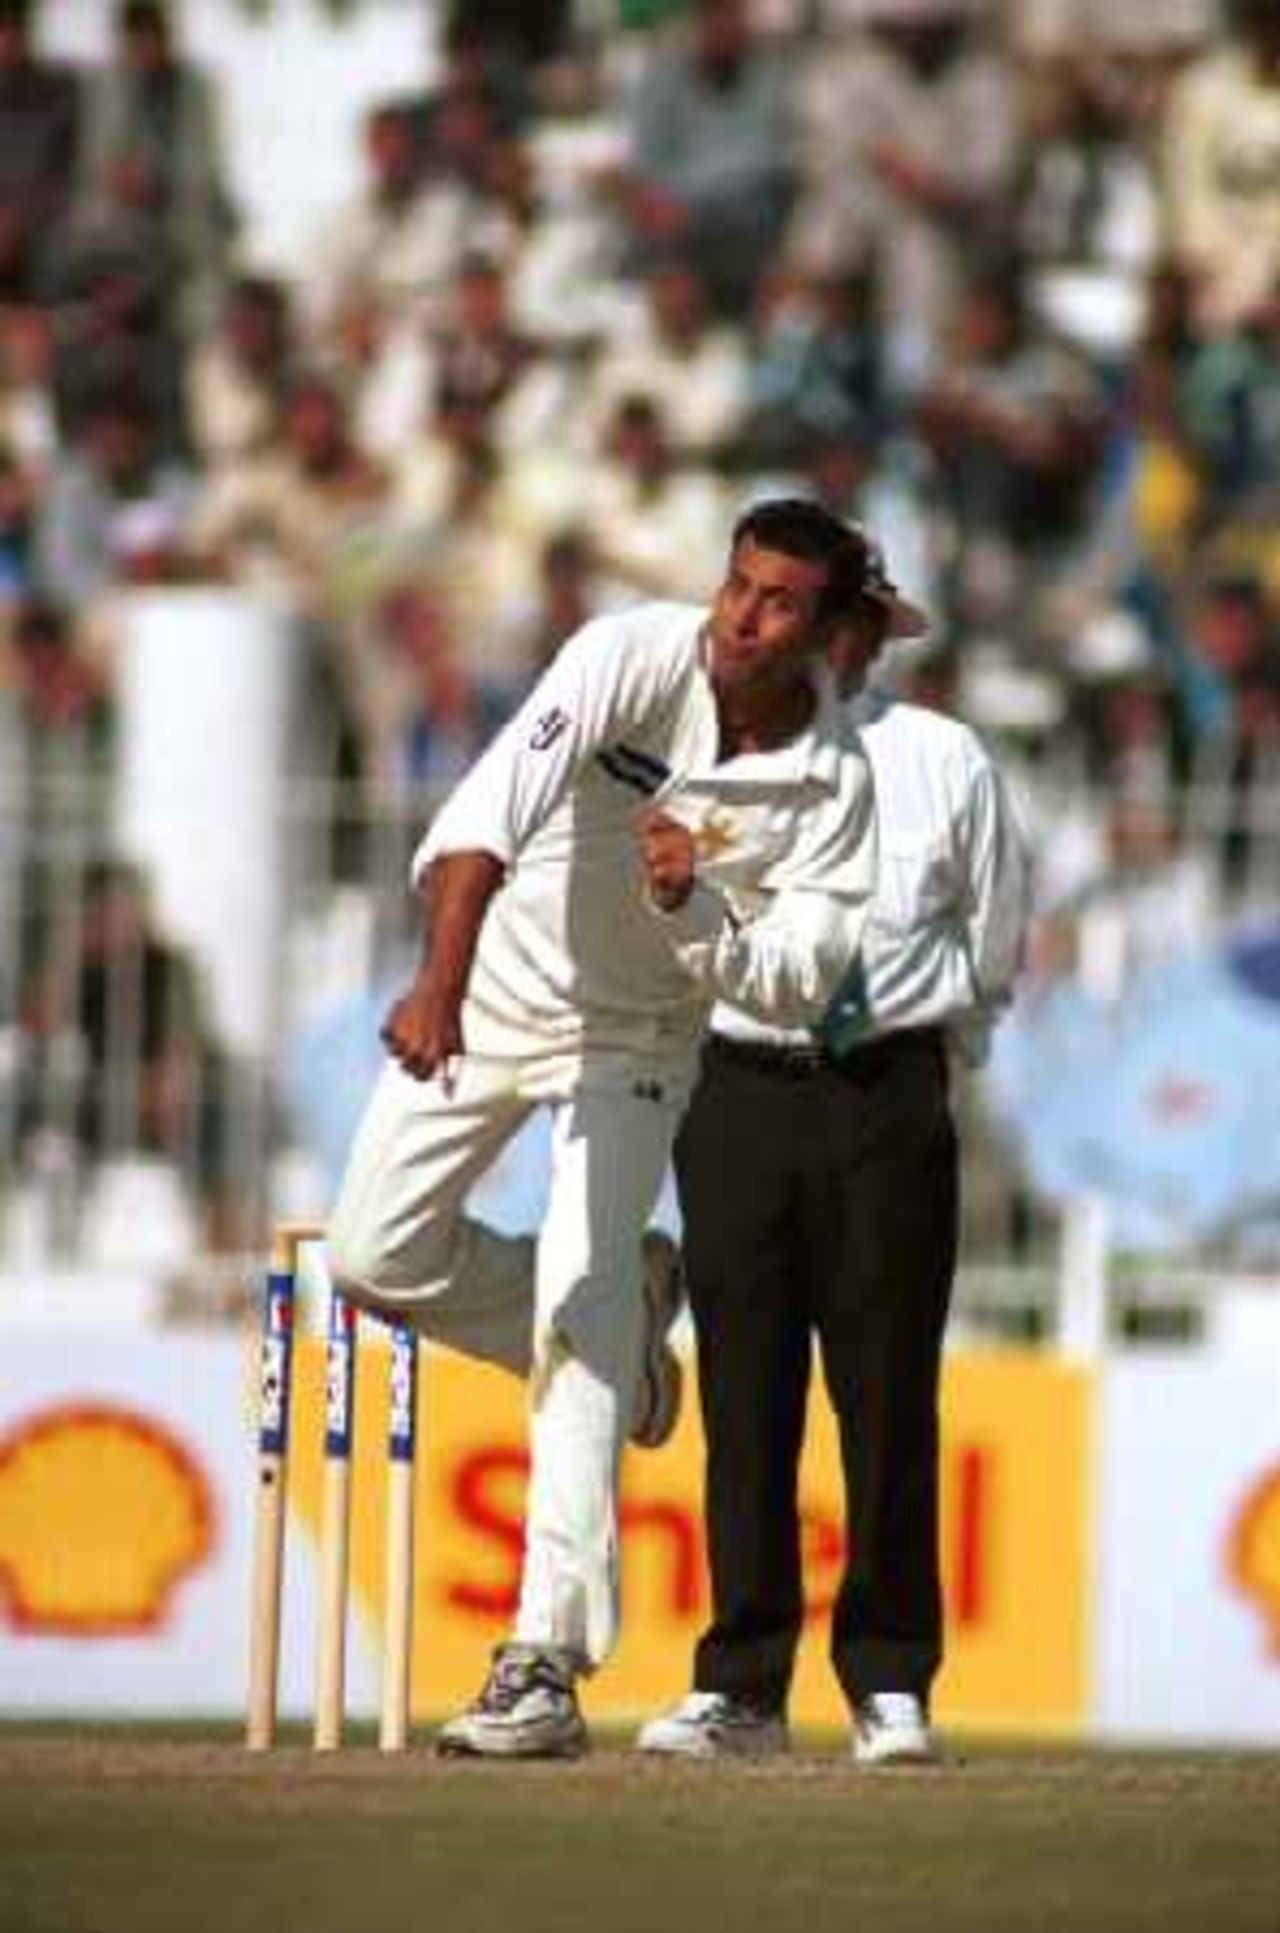 Arshad Khan in his follow through, Day 3, 2nd Test Match, Pakistan v England at Faisalabad, 29 Nov-3 Dec 2000.